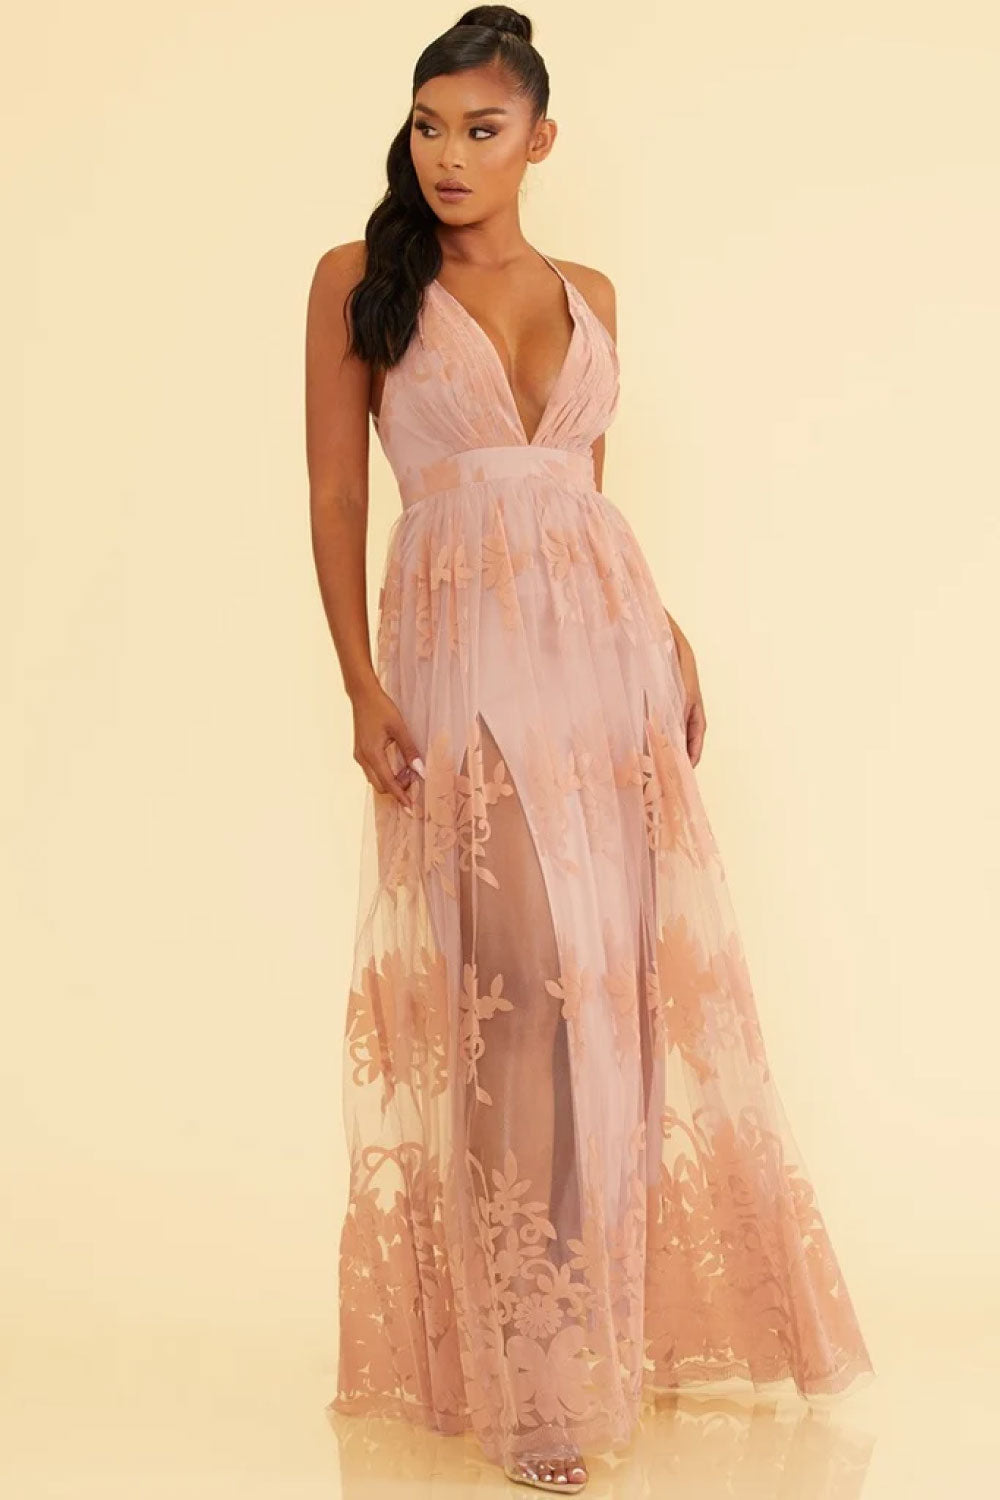 Image of the front of Luxxel's Elegant Lace Gown in Blush on a model.